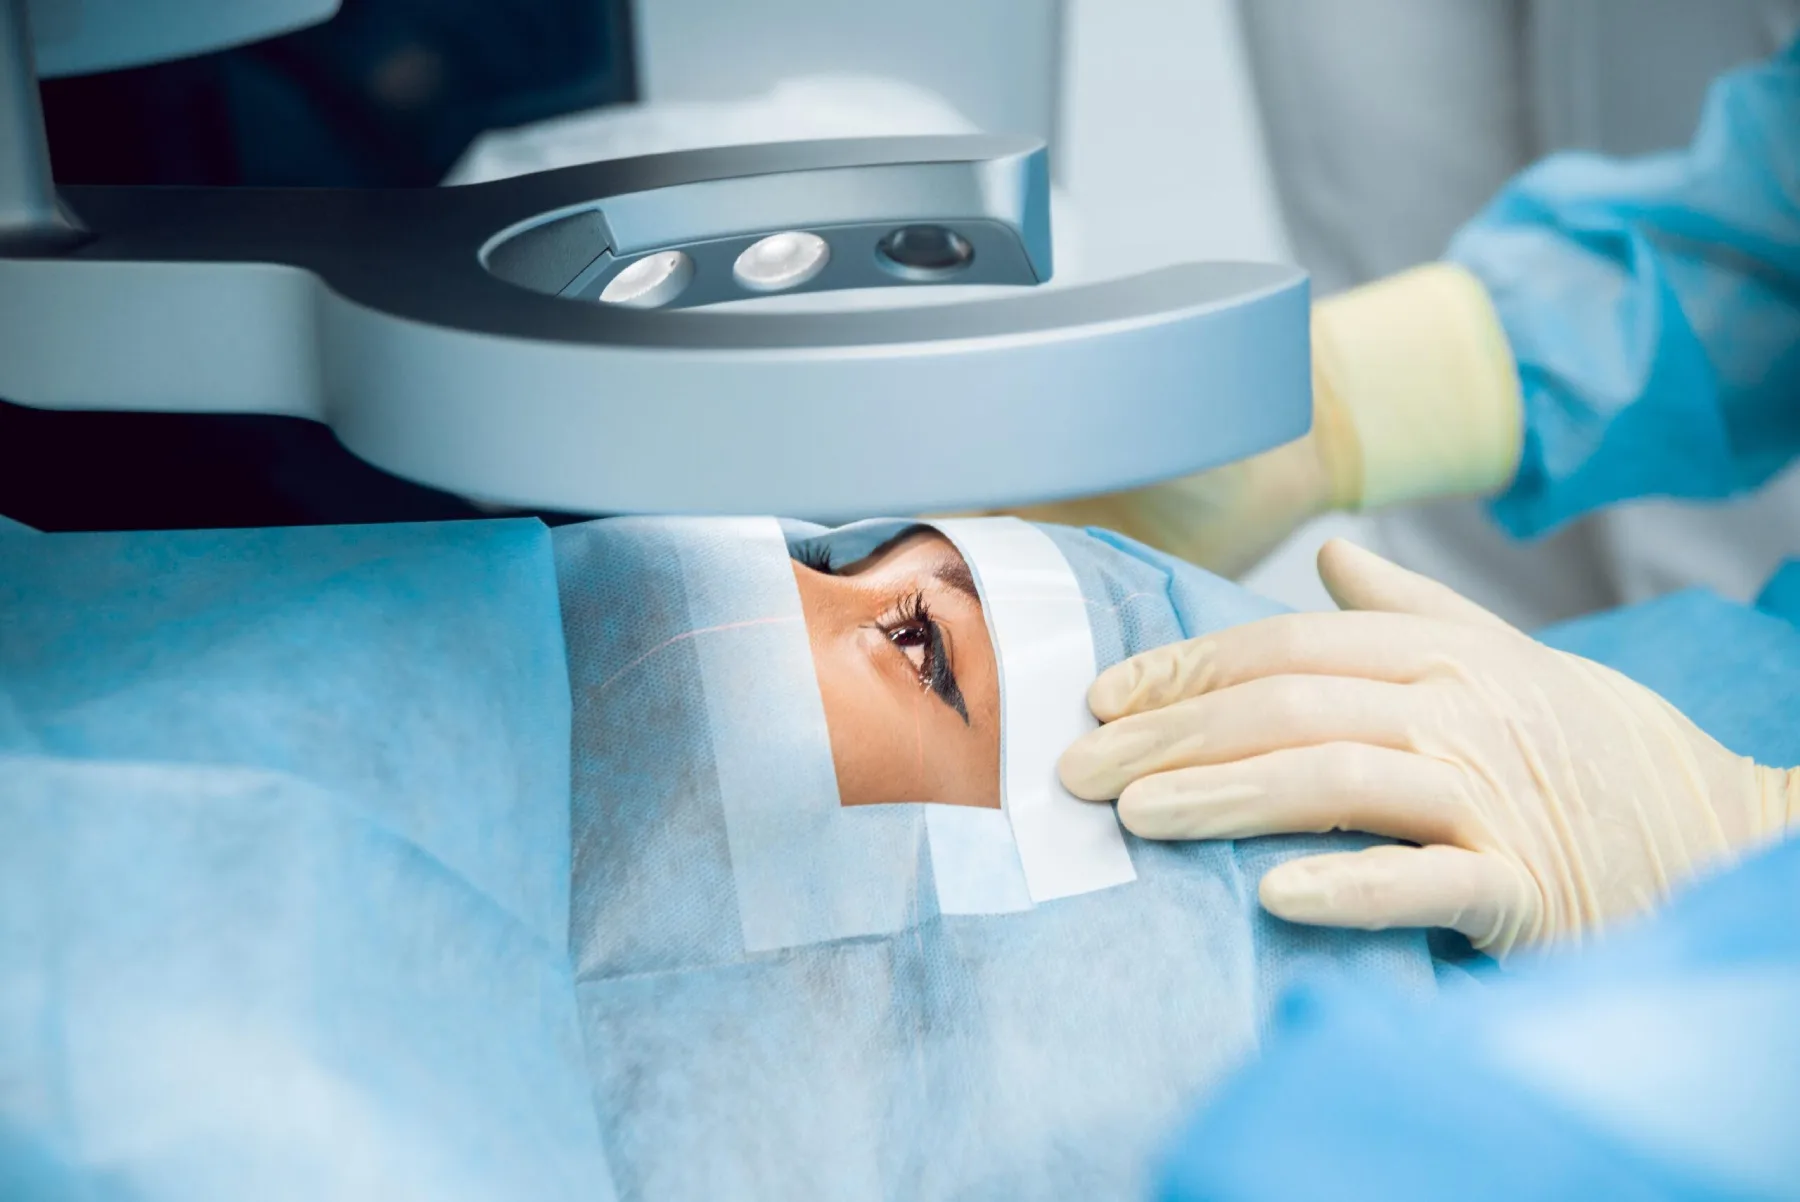 Types of Laser Eye Surgery Used for Presbyopia